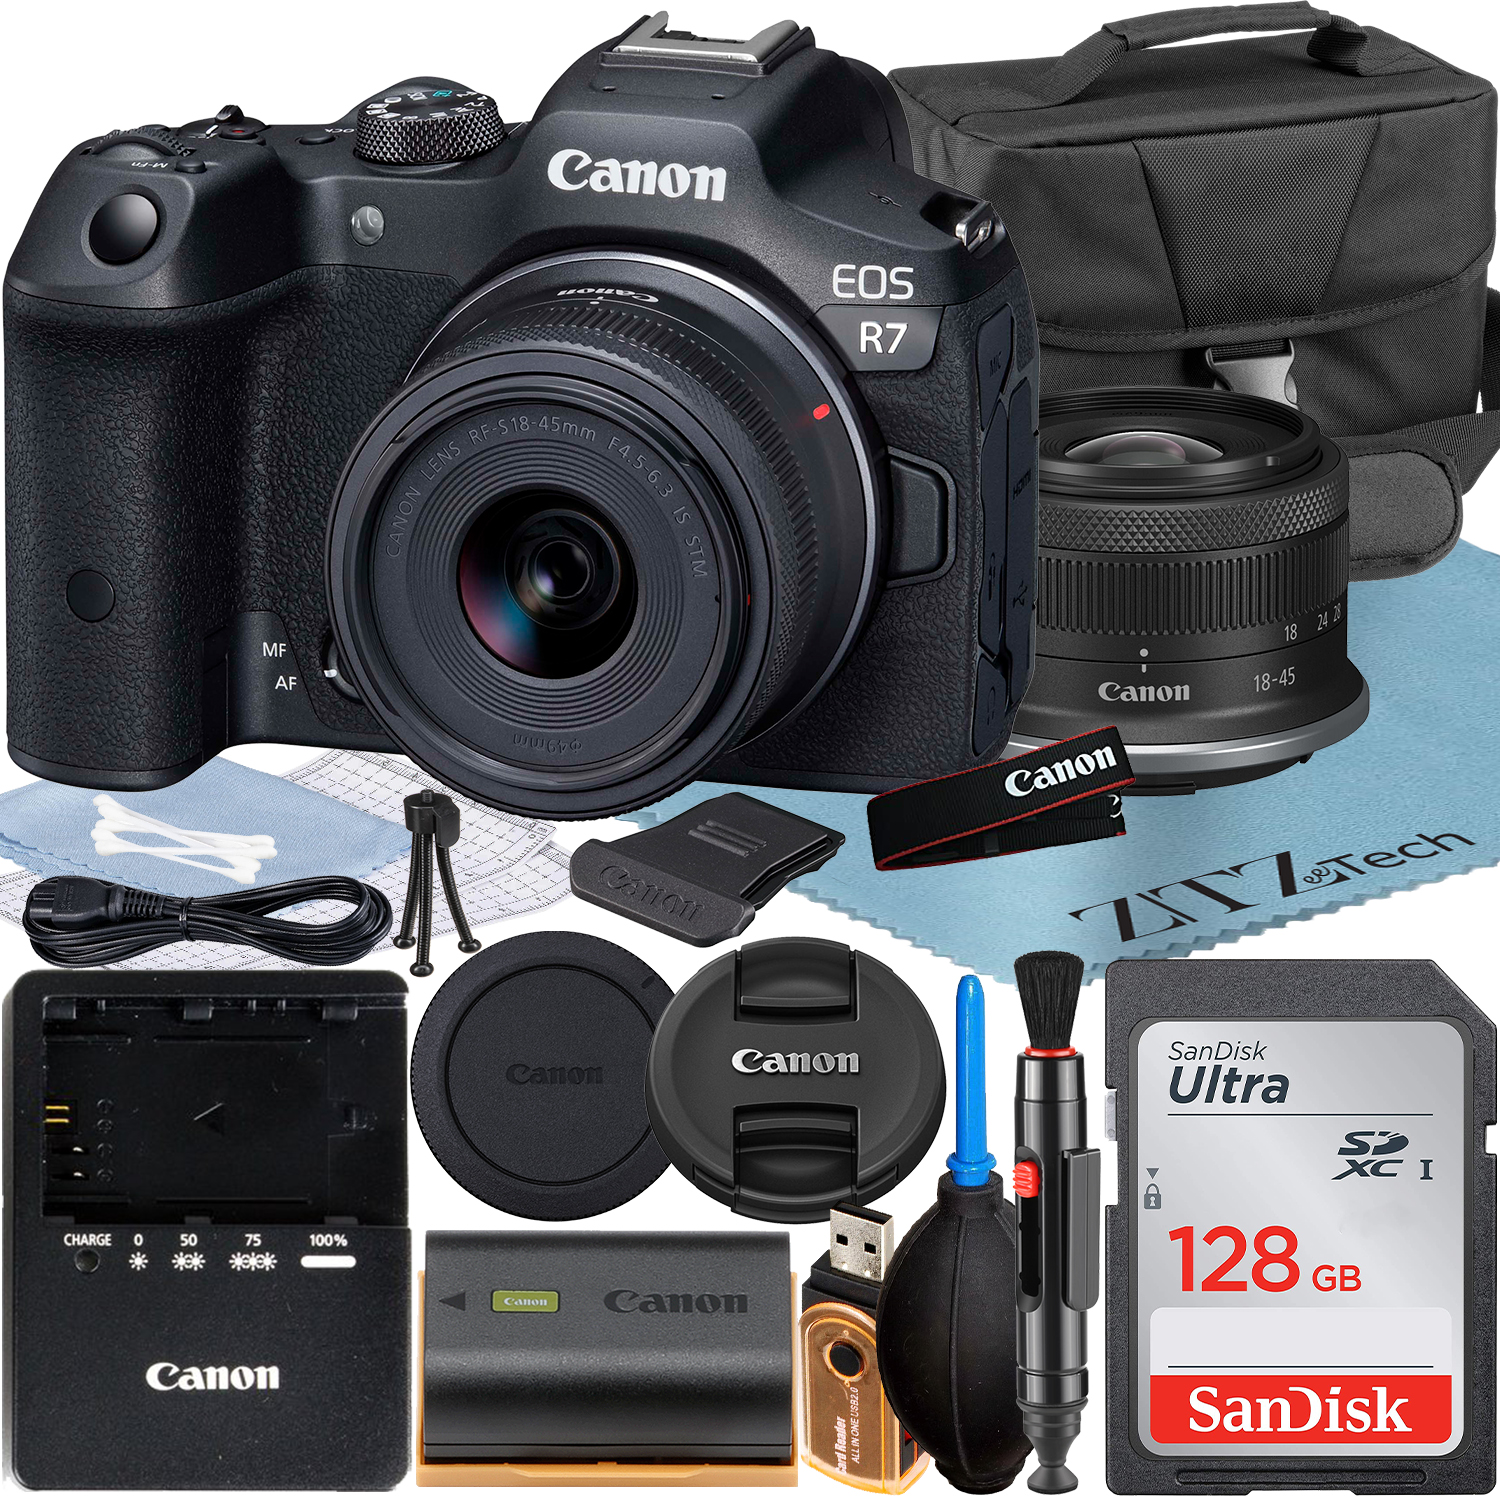 Canon EOS R7 Mirrorless Camera with RF-S 18-45mm Lens + SanDisk 128GB Memory Card + Case + ZeeTech Accessory Bundle